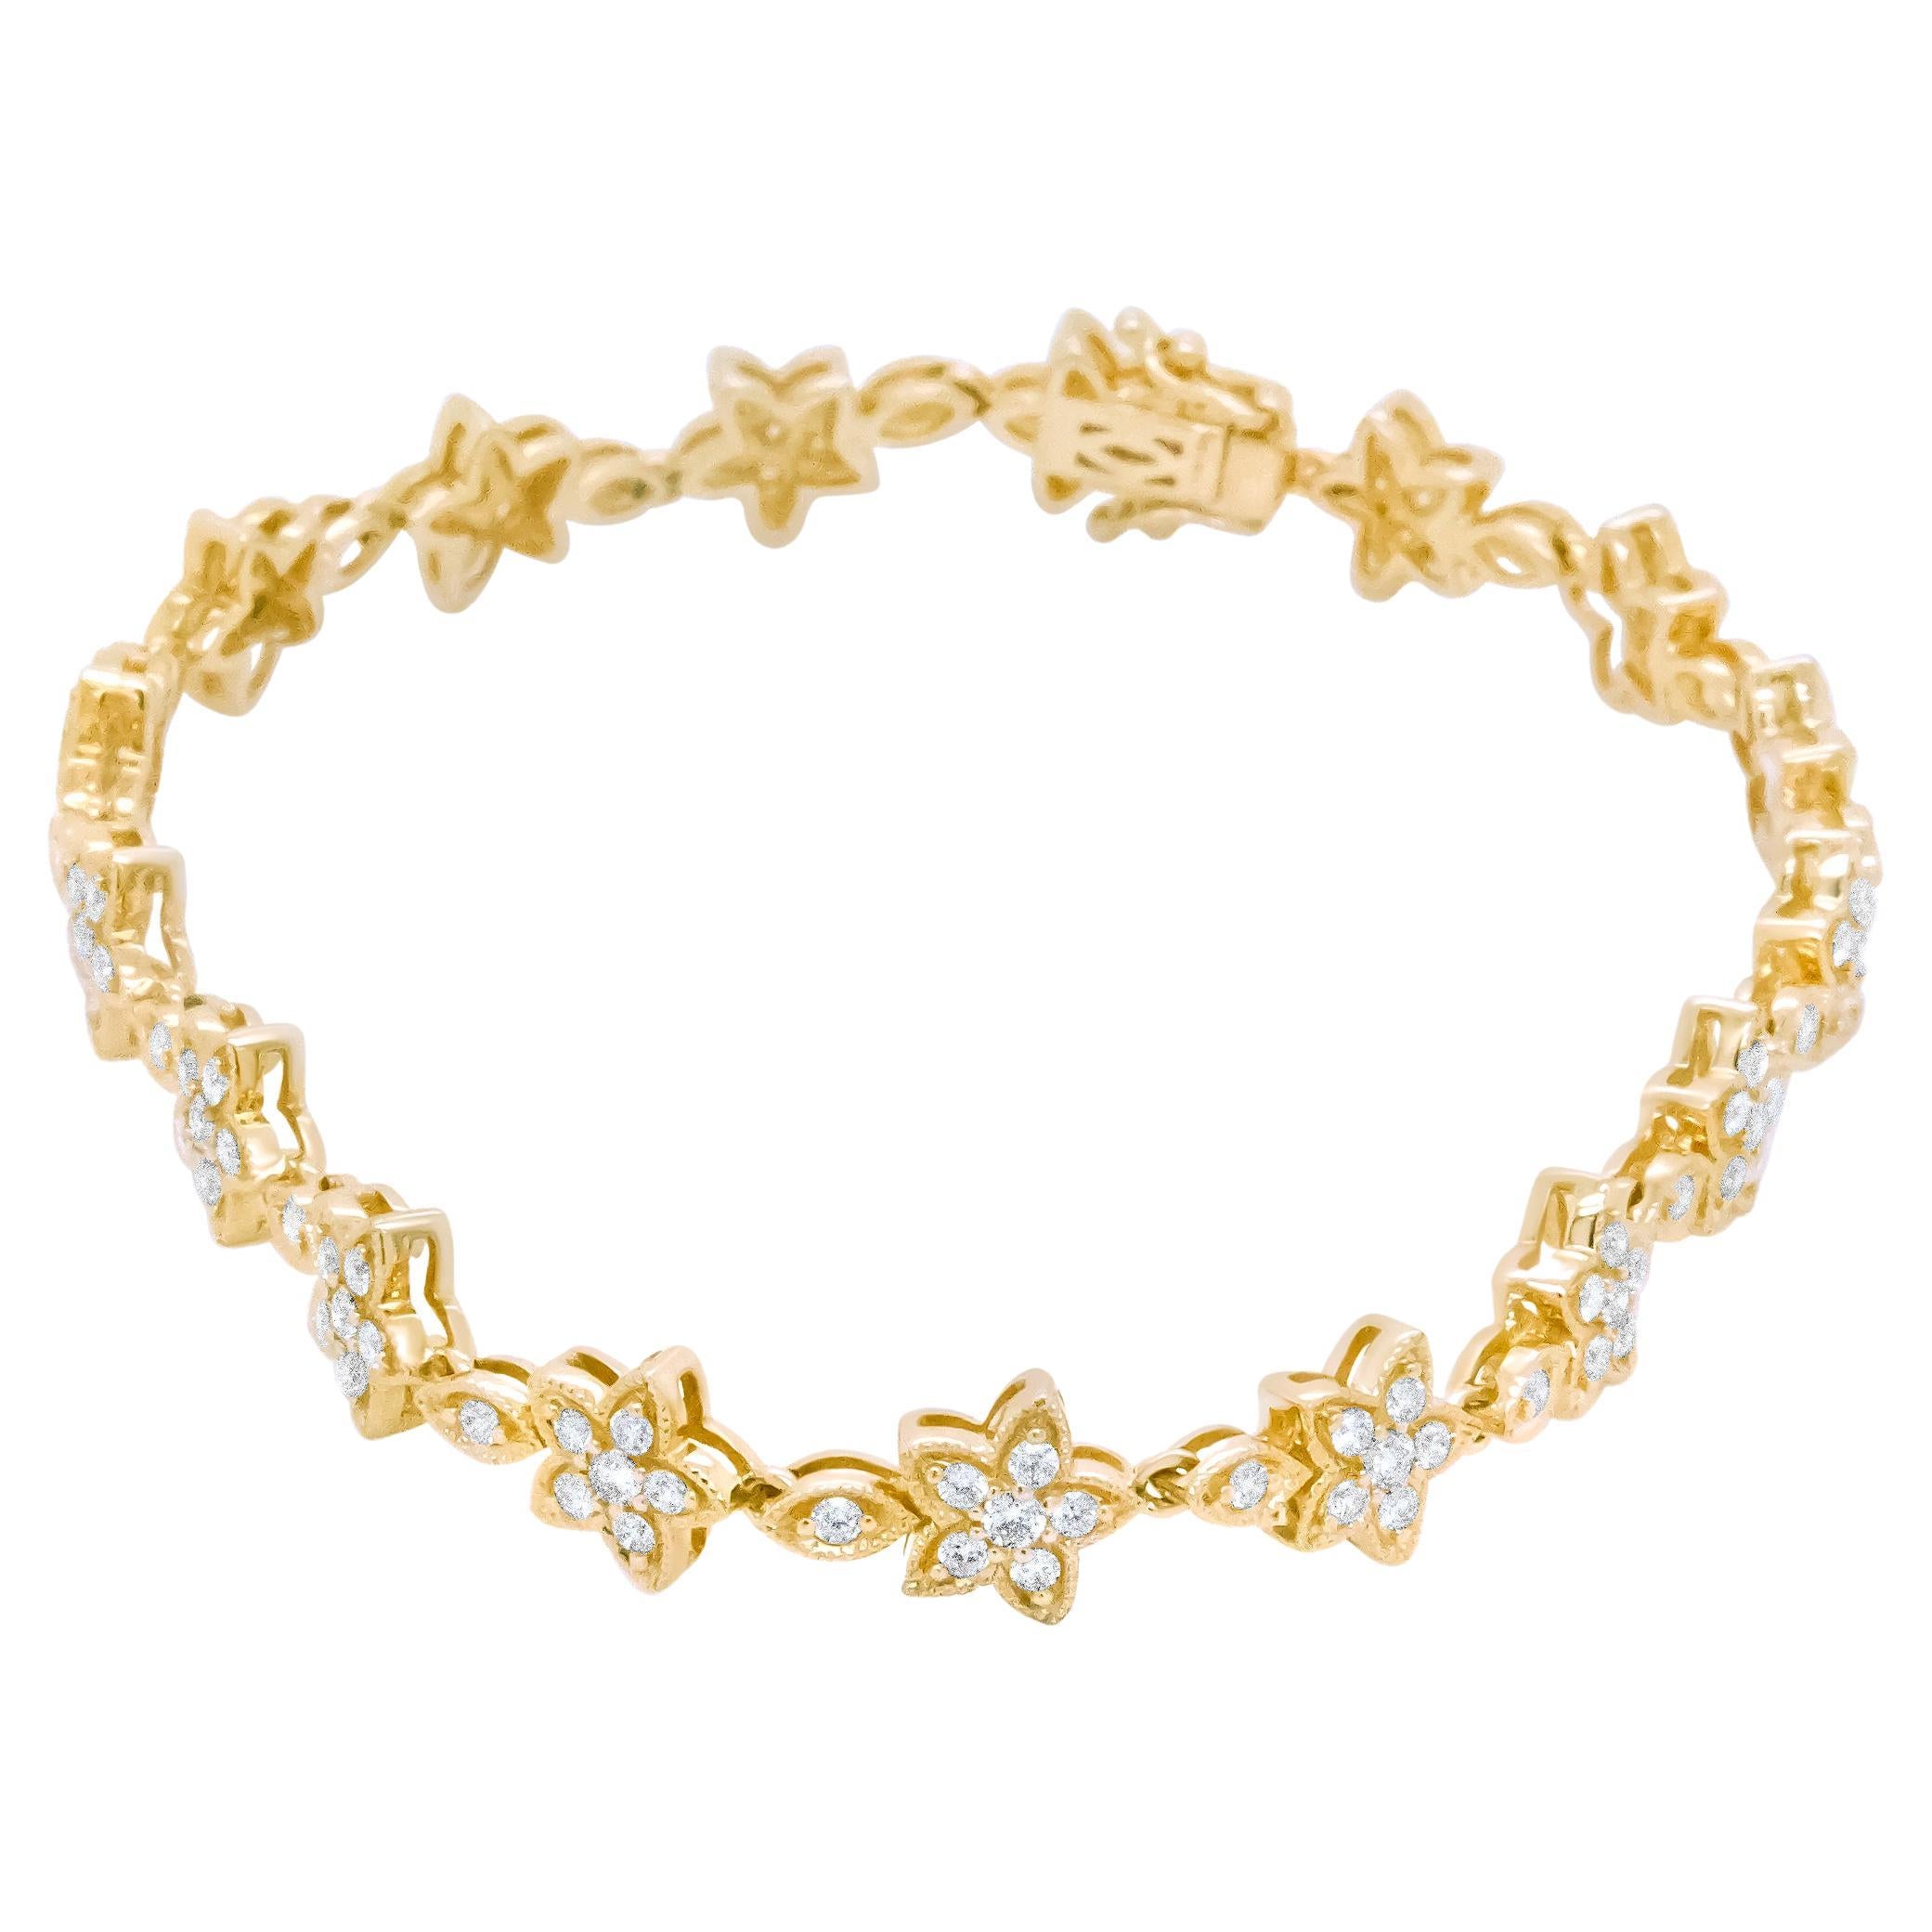 14K Yellow Gold 1 1/5 Carat Round Diamond Floral Star-Shaped Link Bracelet For Sale